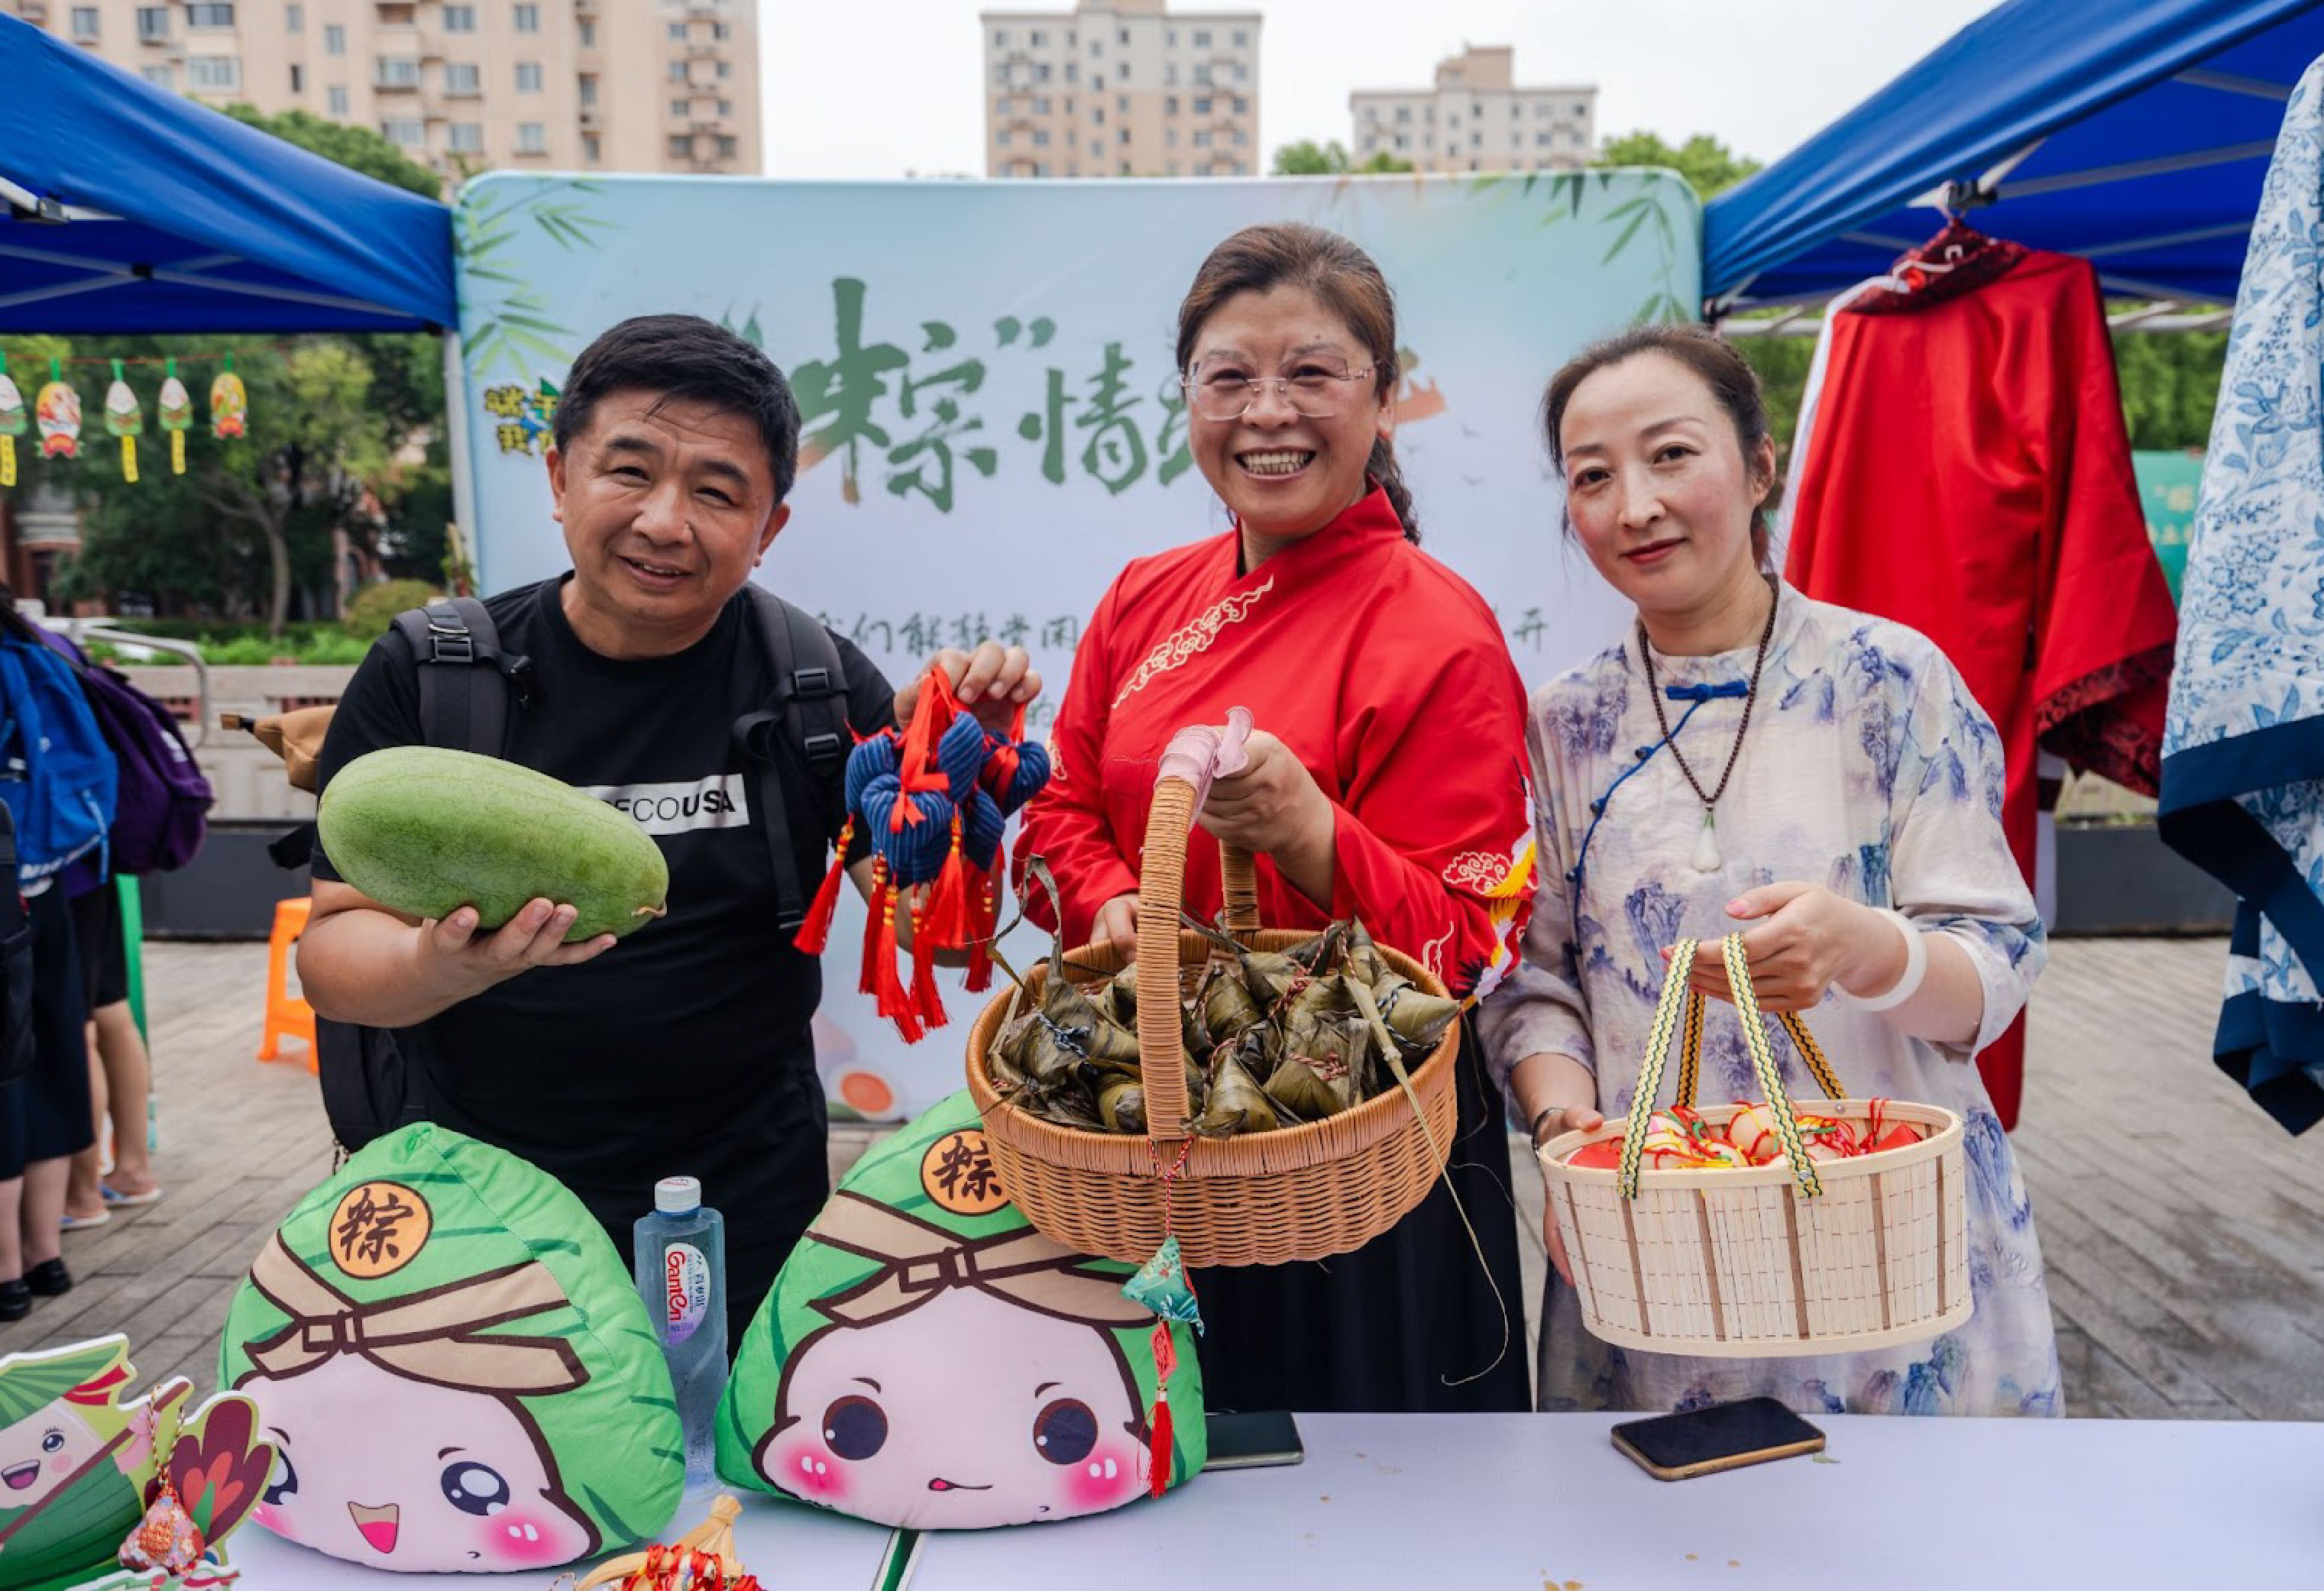 local vendors present their goods: a sanlin yellow melon, a basket of zongzi, and a basket of eggs